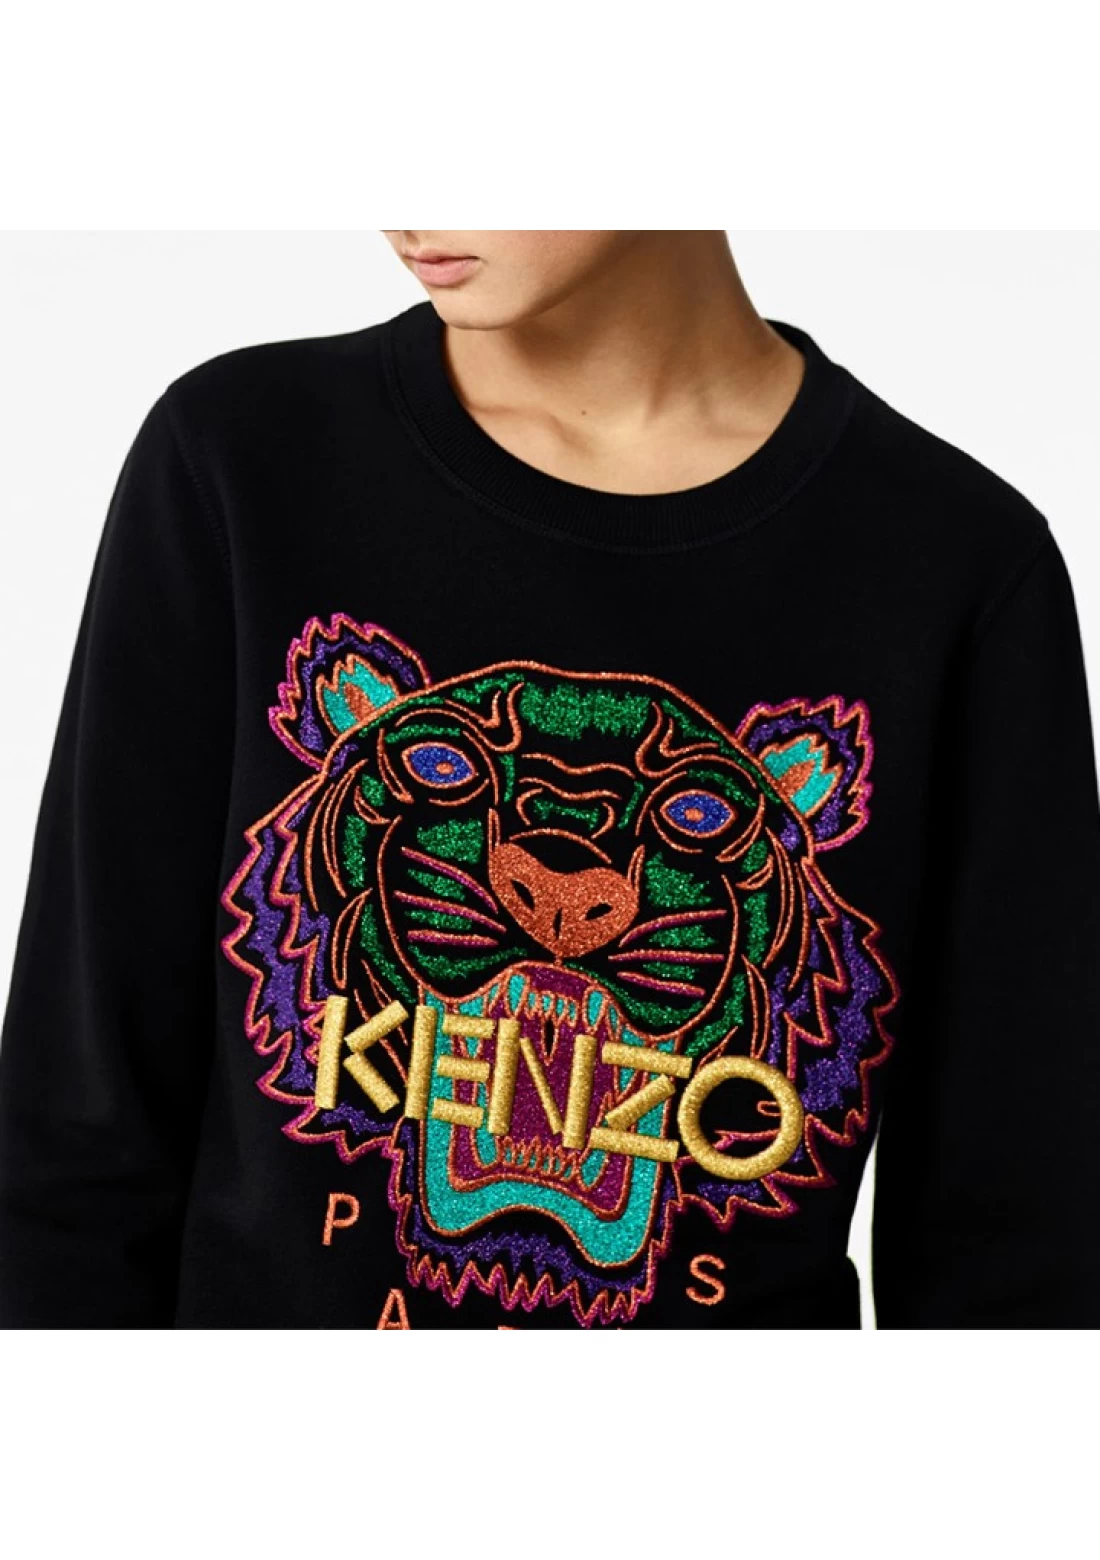 Kenzo Womens Holiday Capsule Collection Tiger sweater black